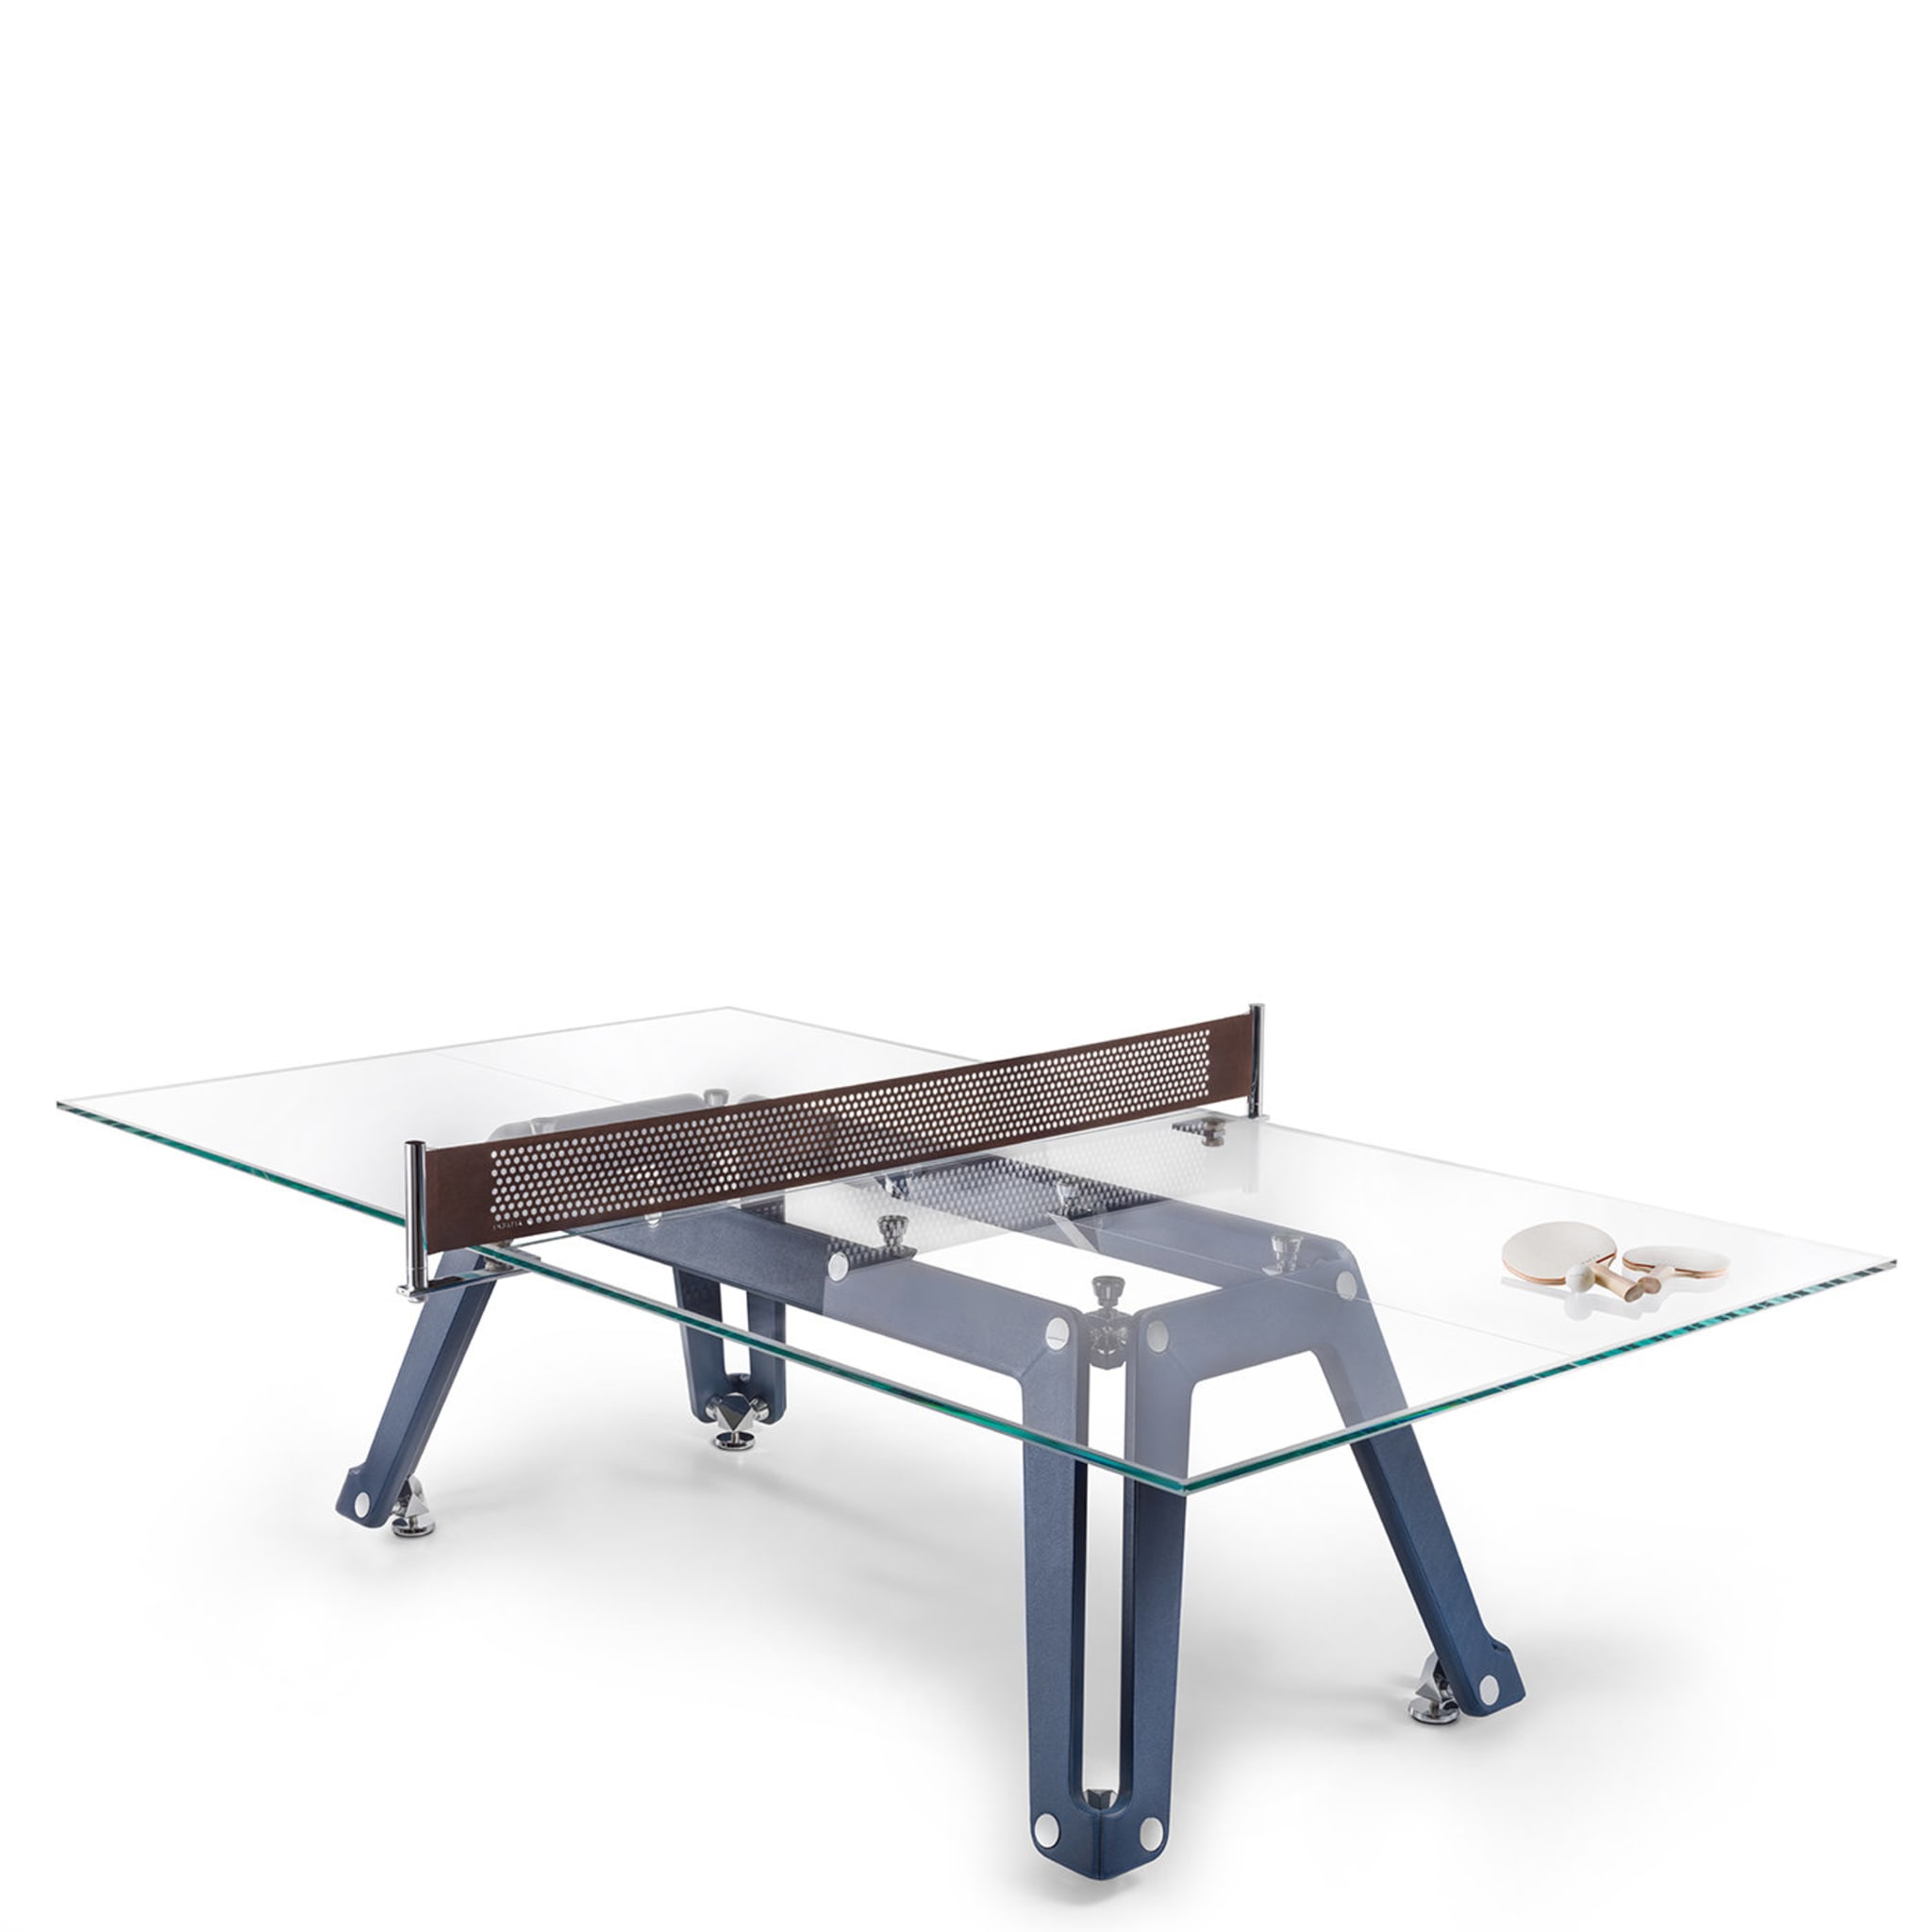 Lungolinea Glass Table Tennis Table by Adriano Design - Alternative view 1